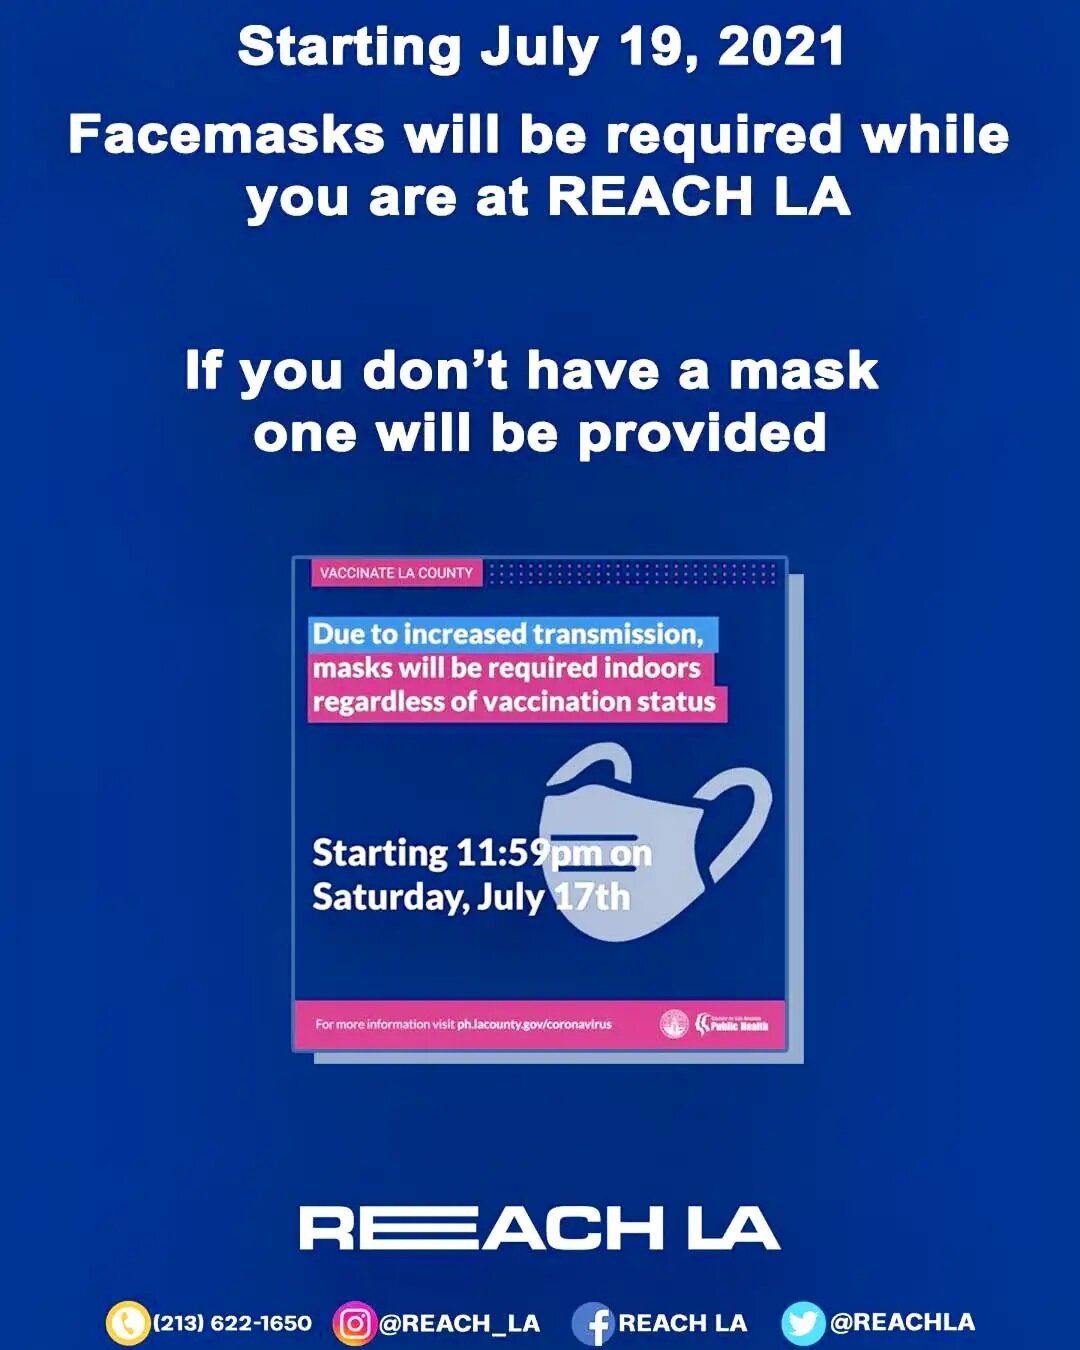 Starting July 19, 2021.
Facemasks will be required while you are REACH LA.
🔴😷If you don't have a mask one will be provided. 😷🔴
&quot;Due to increased COVID-19 transmissions, LA County will be requiring masks indoors regardless of vaccination stat